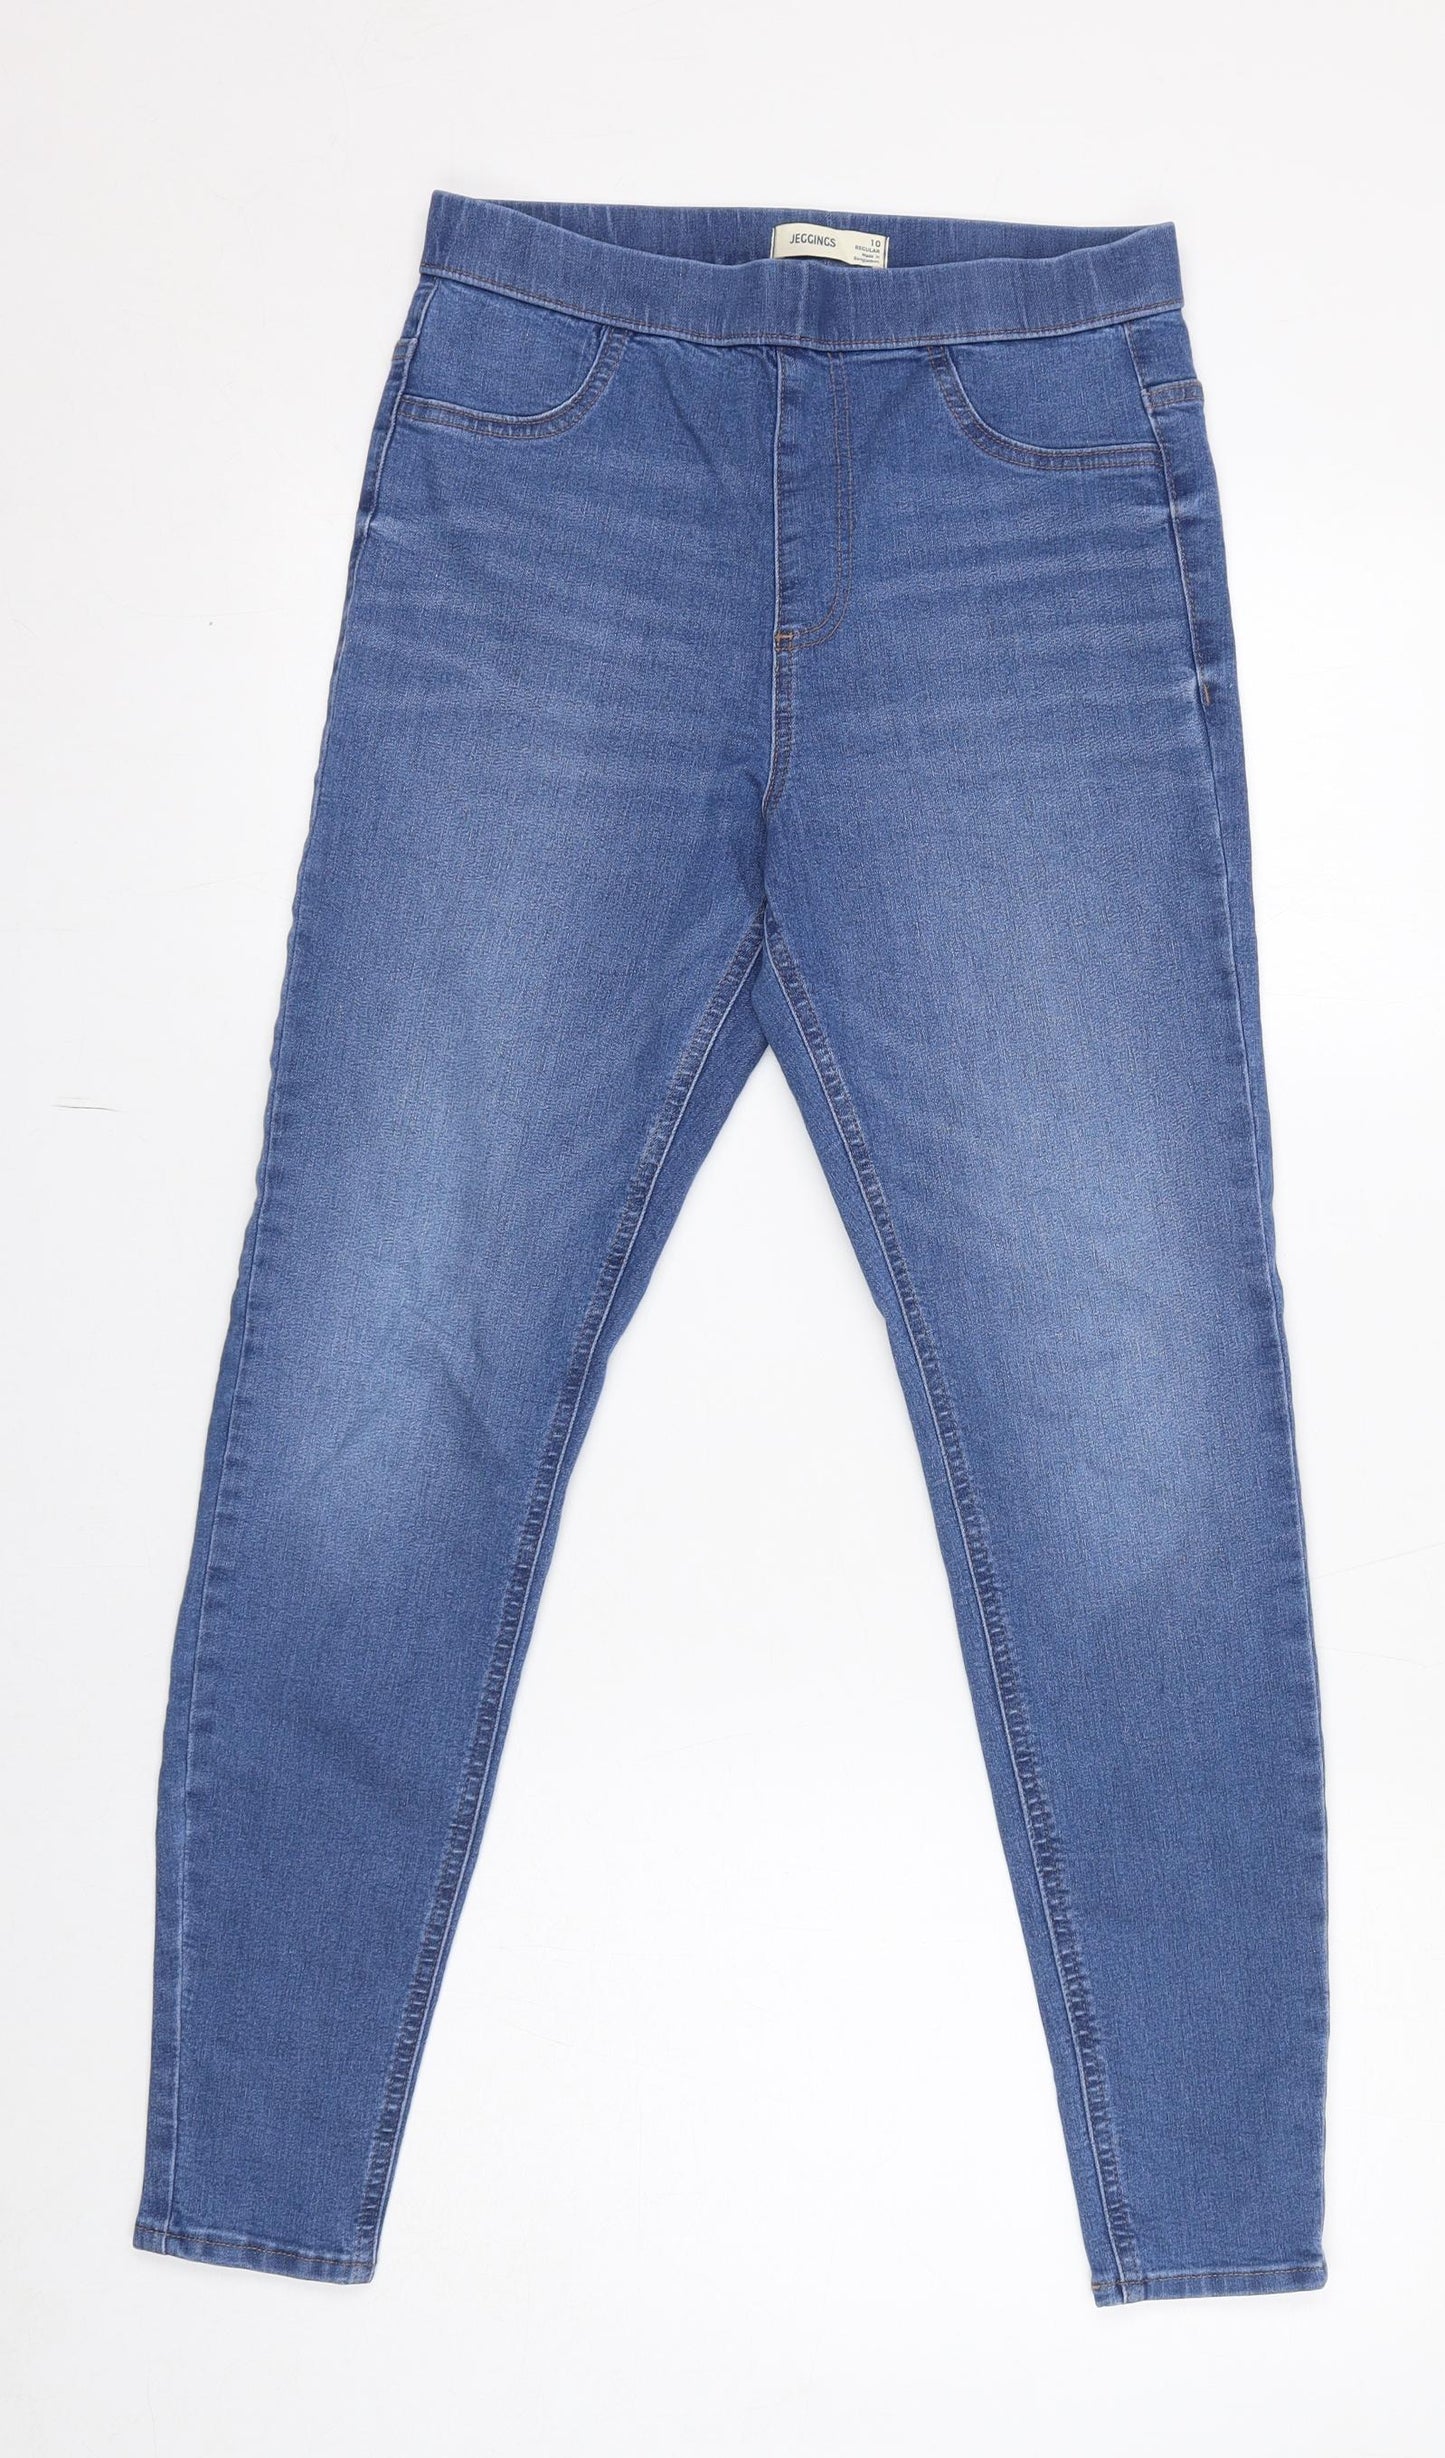 Marks and Spencer Womens Blue Cotton Jegging Jeans Size 10 L28 in Regular